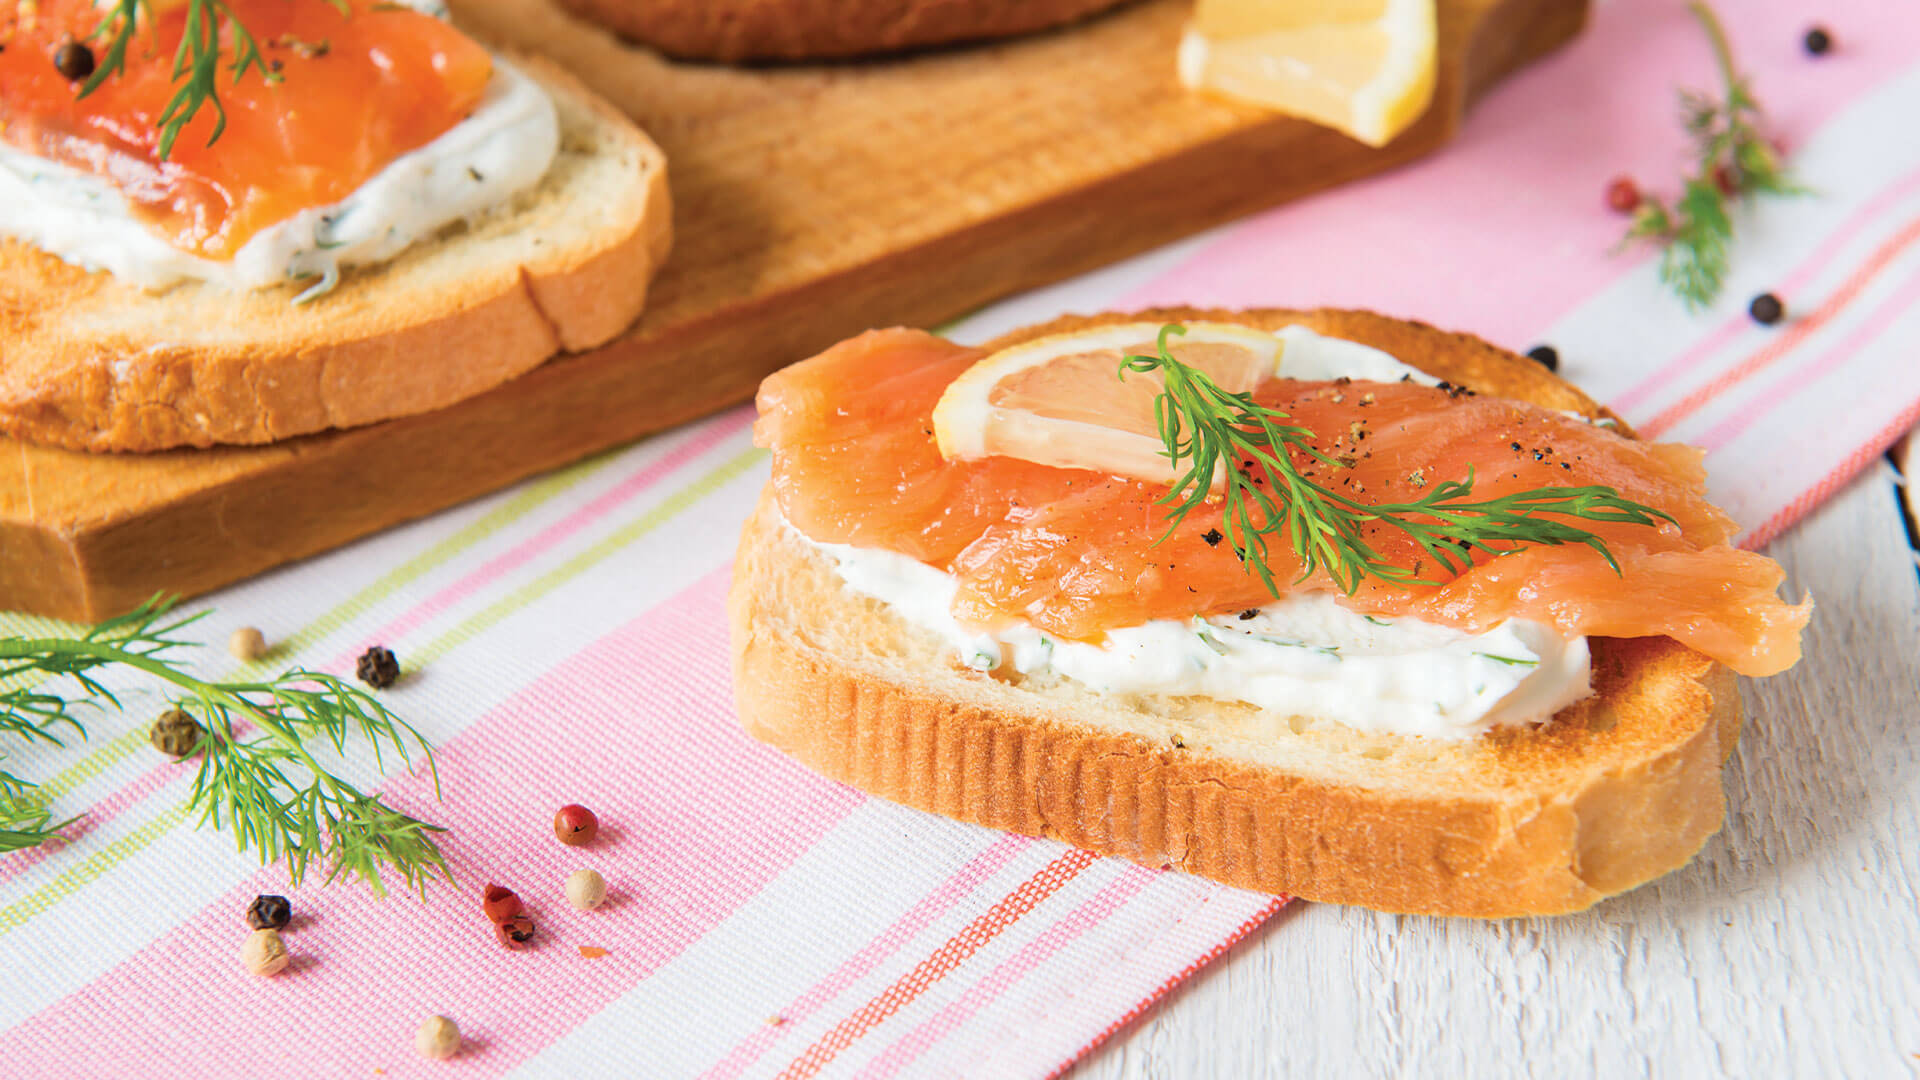 A perfect Rosé pairing of crostini with smoked salmon and cream cheese.